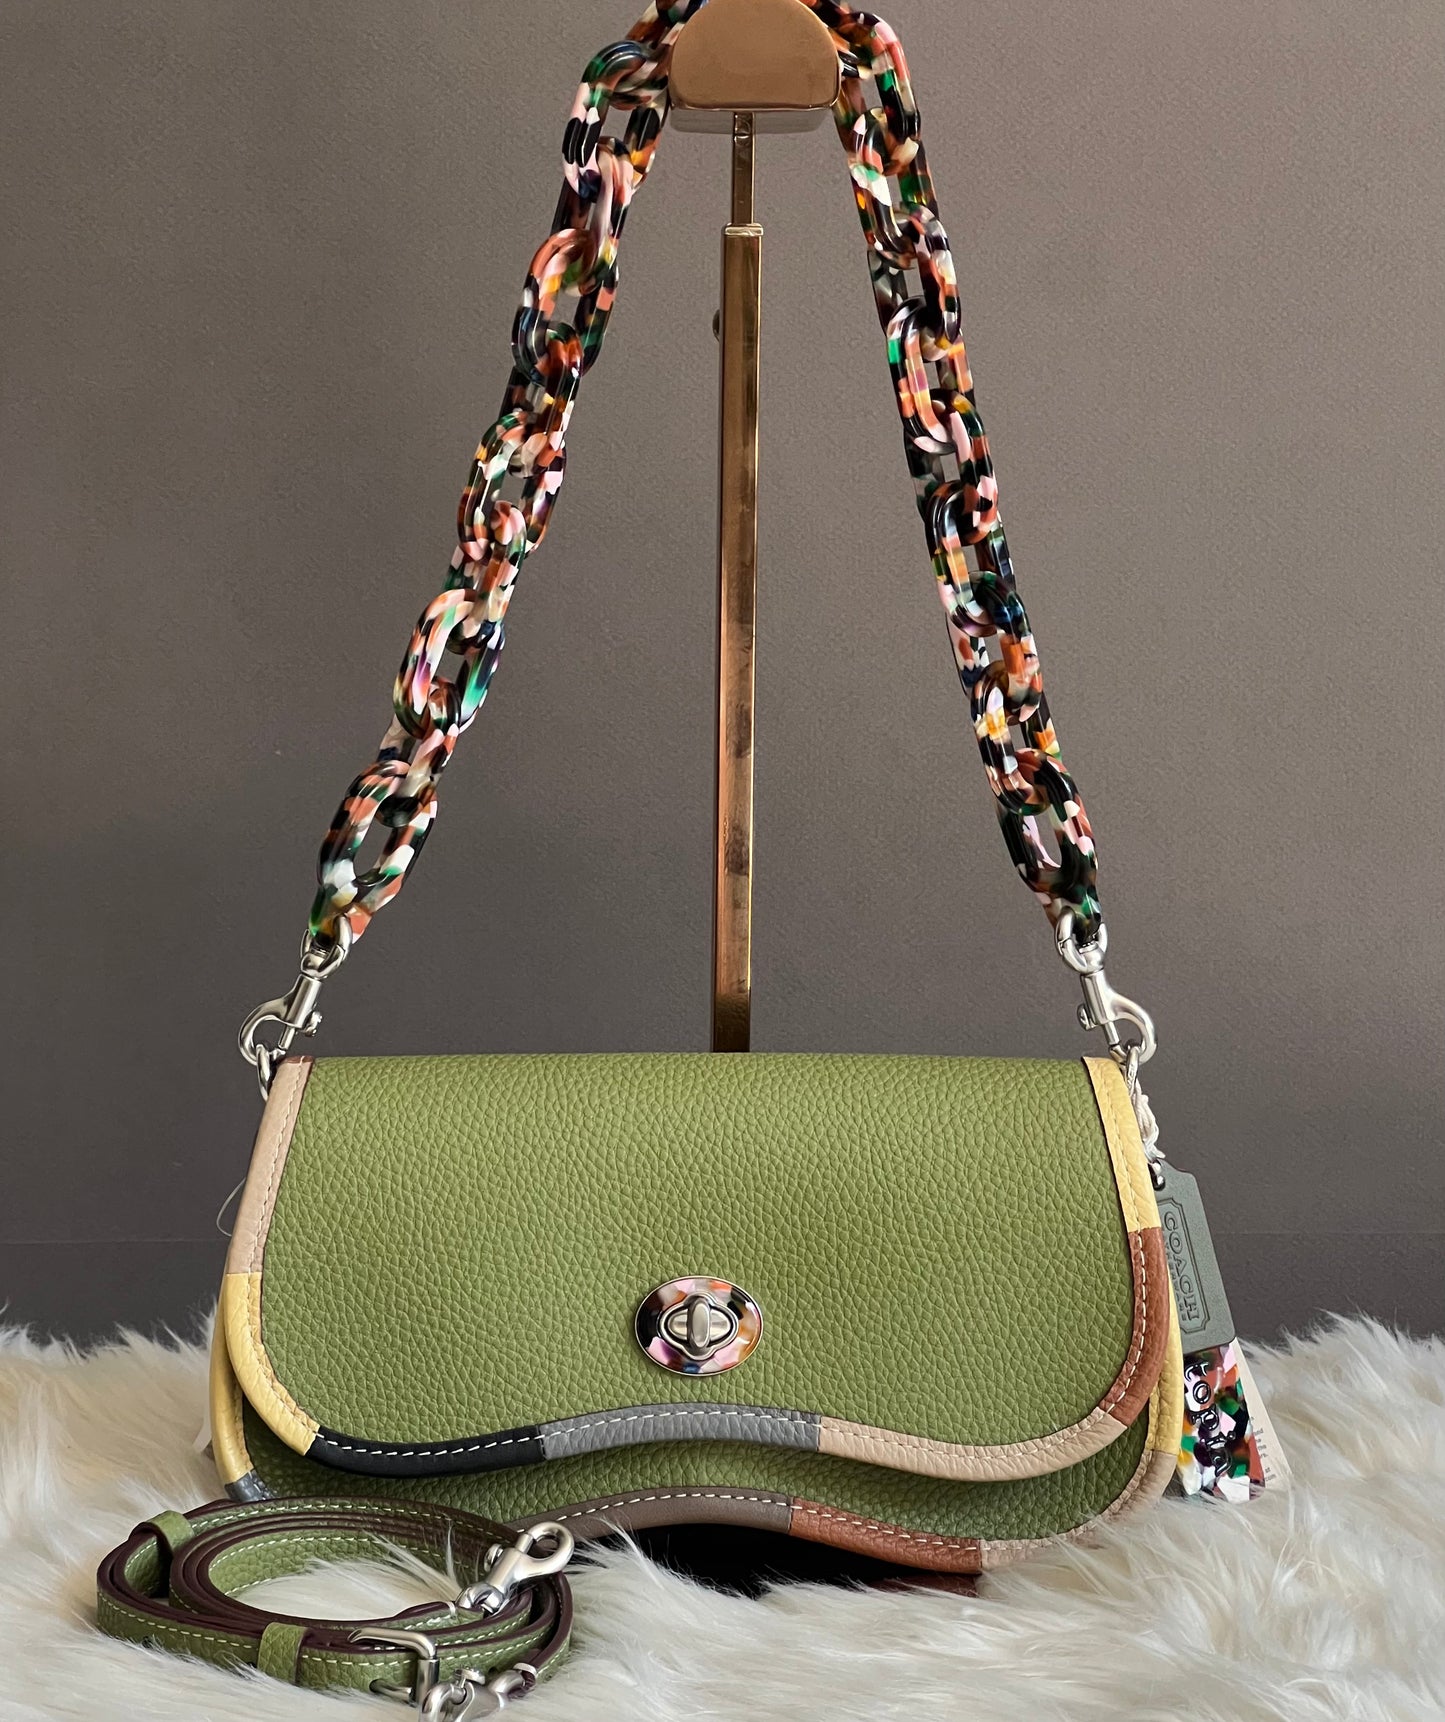 Coach Wavy Dinky Bag with Colorful Binding in Upcrafted Leather